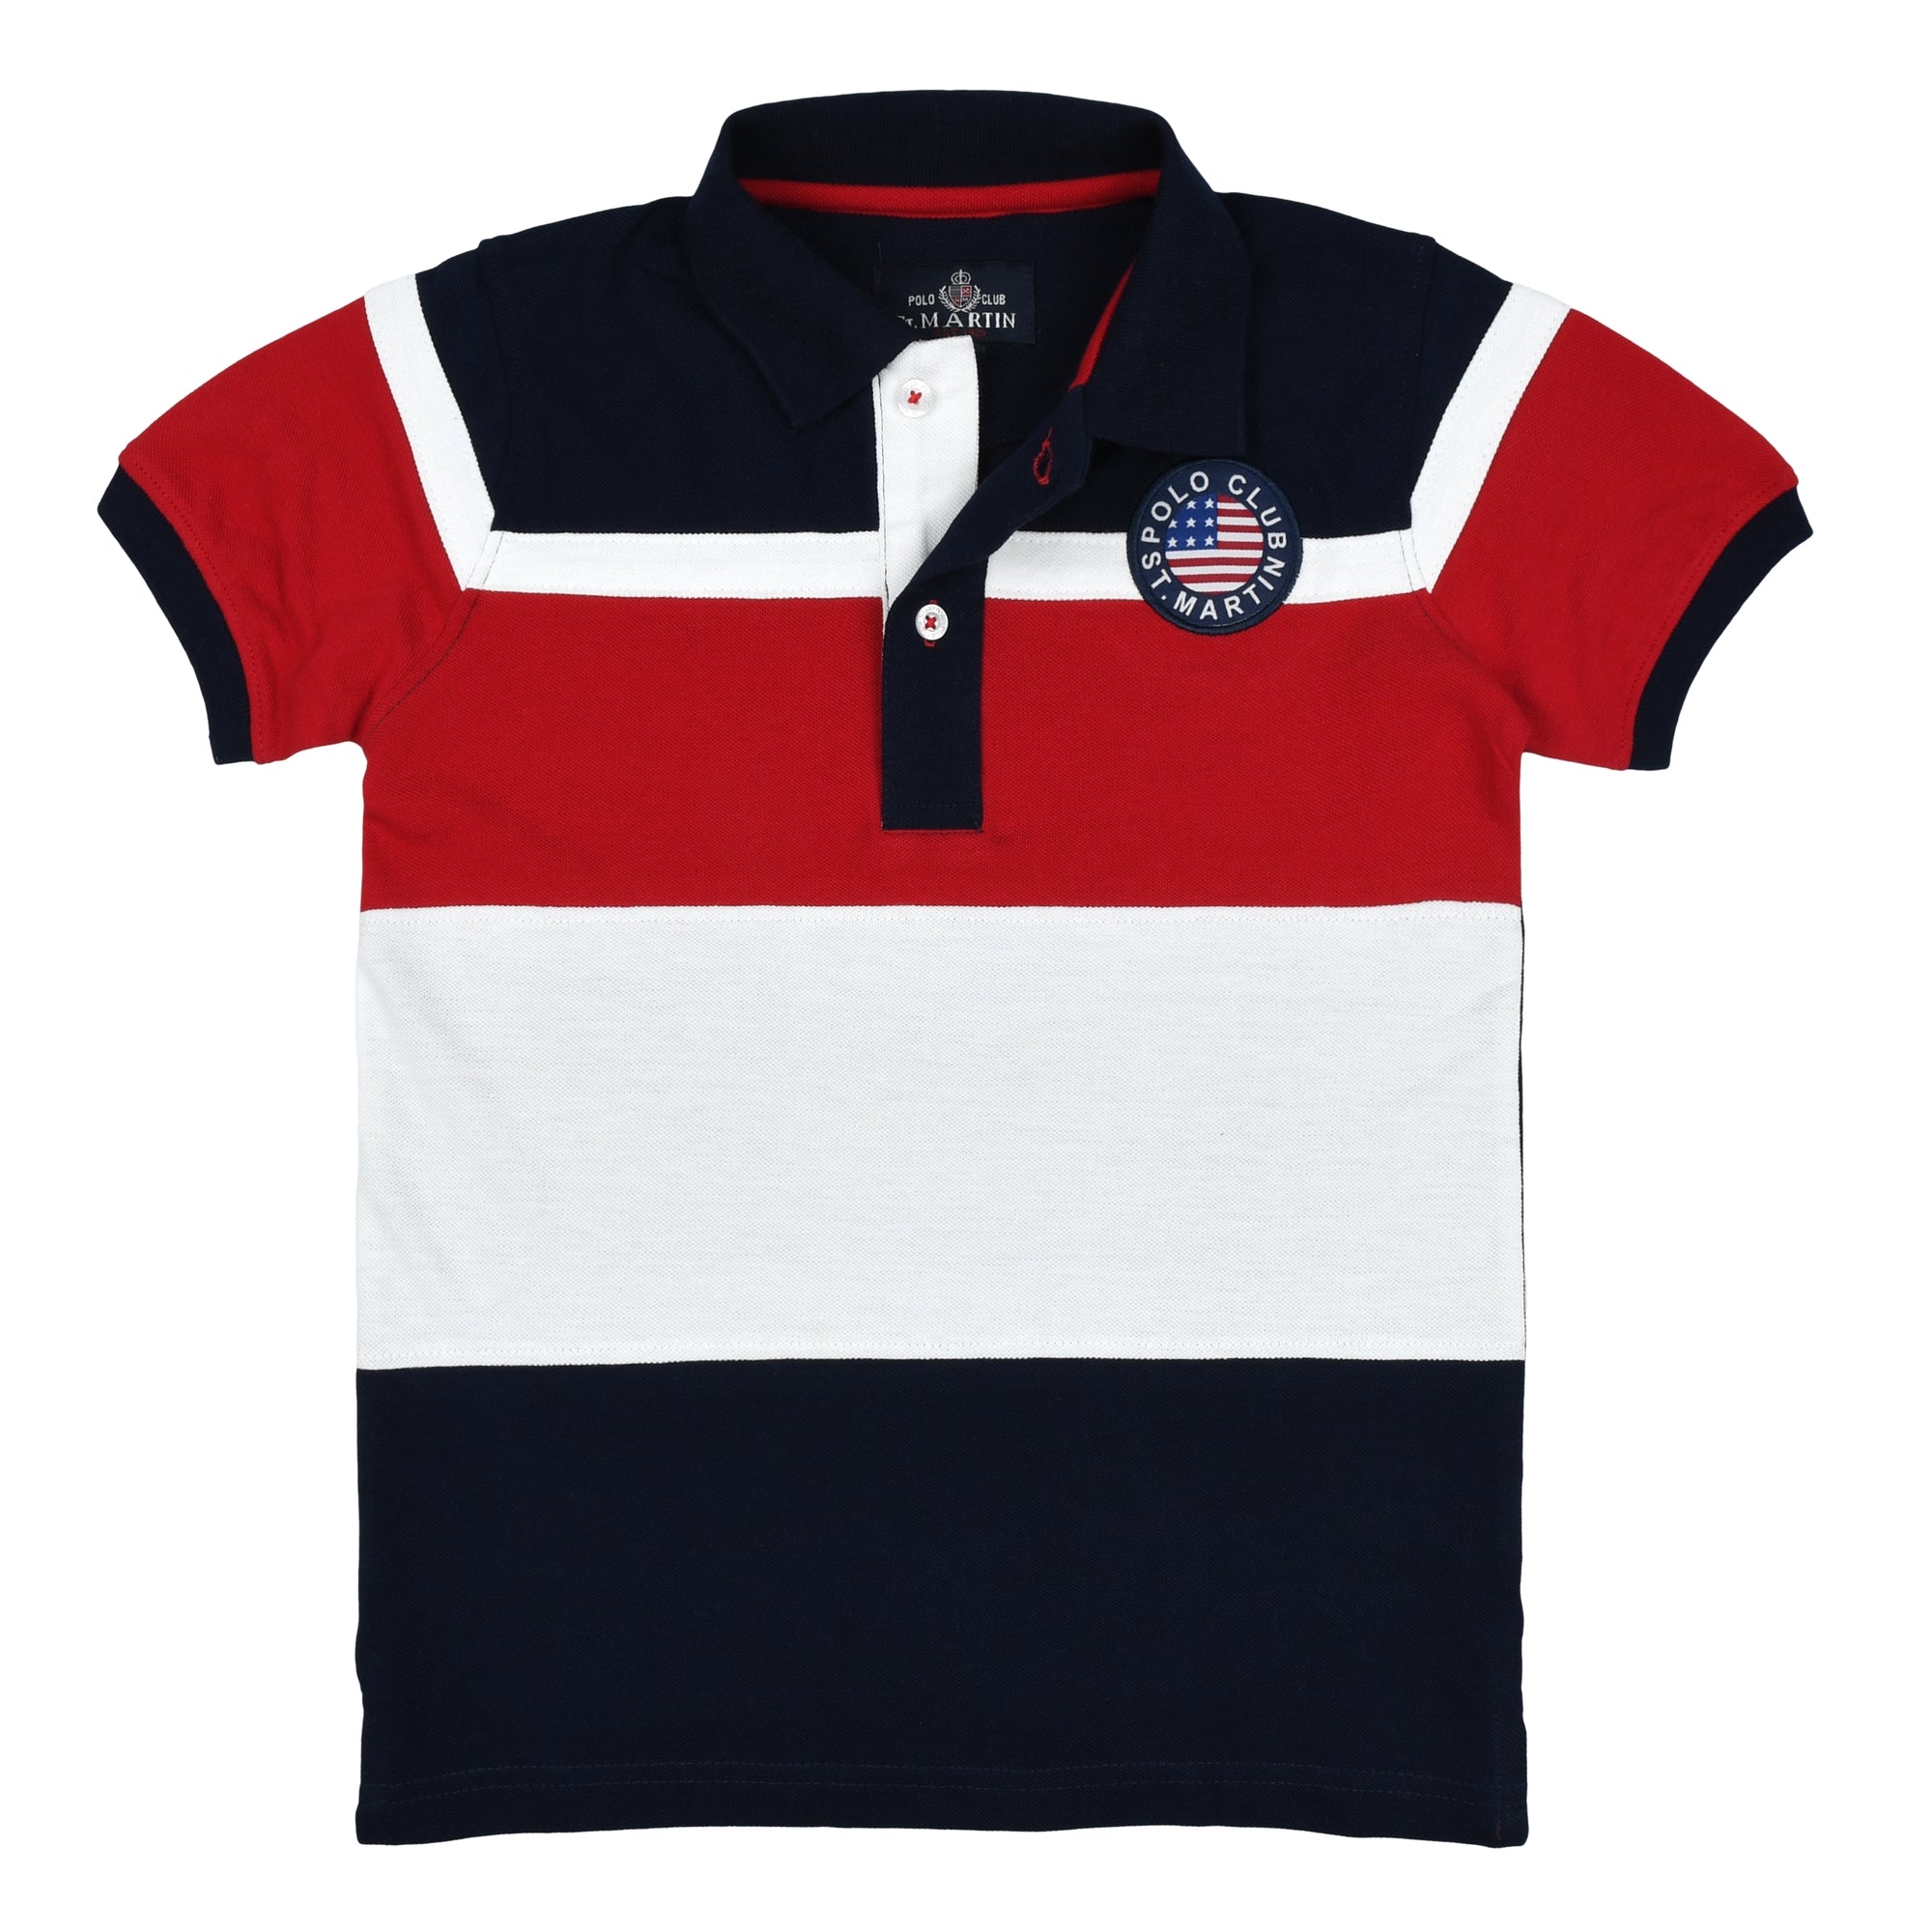 Banded pique polo shirt with logo patch